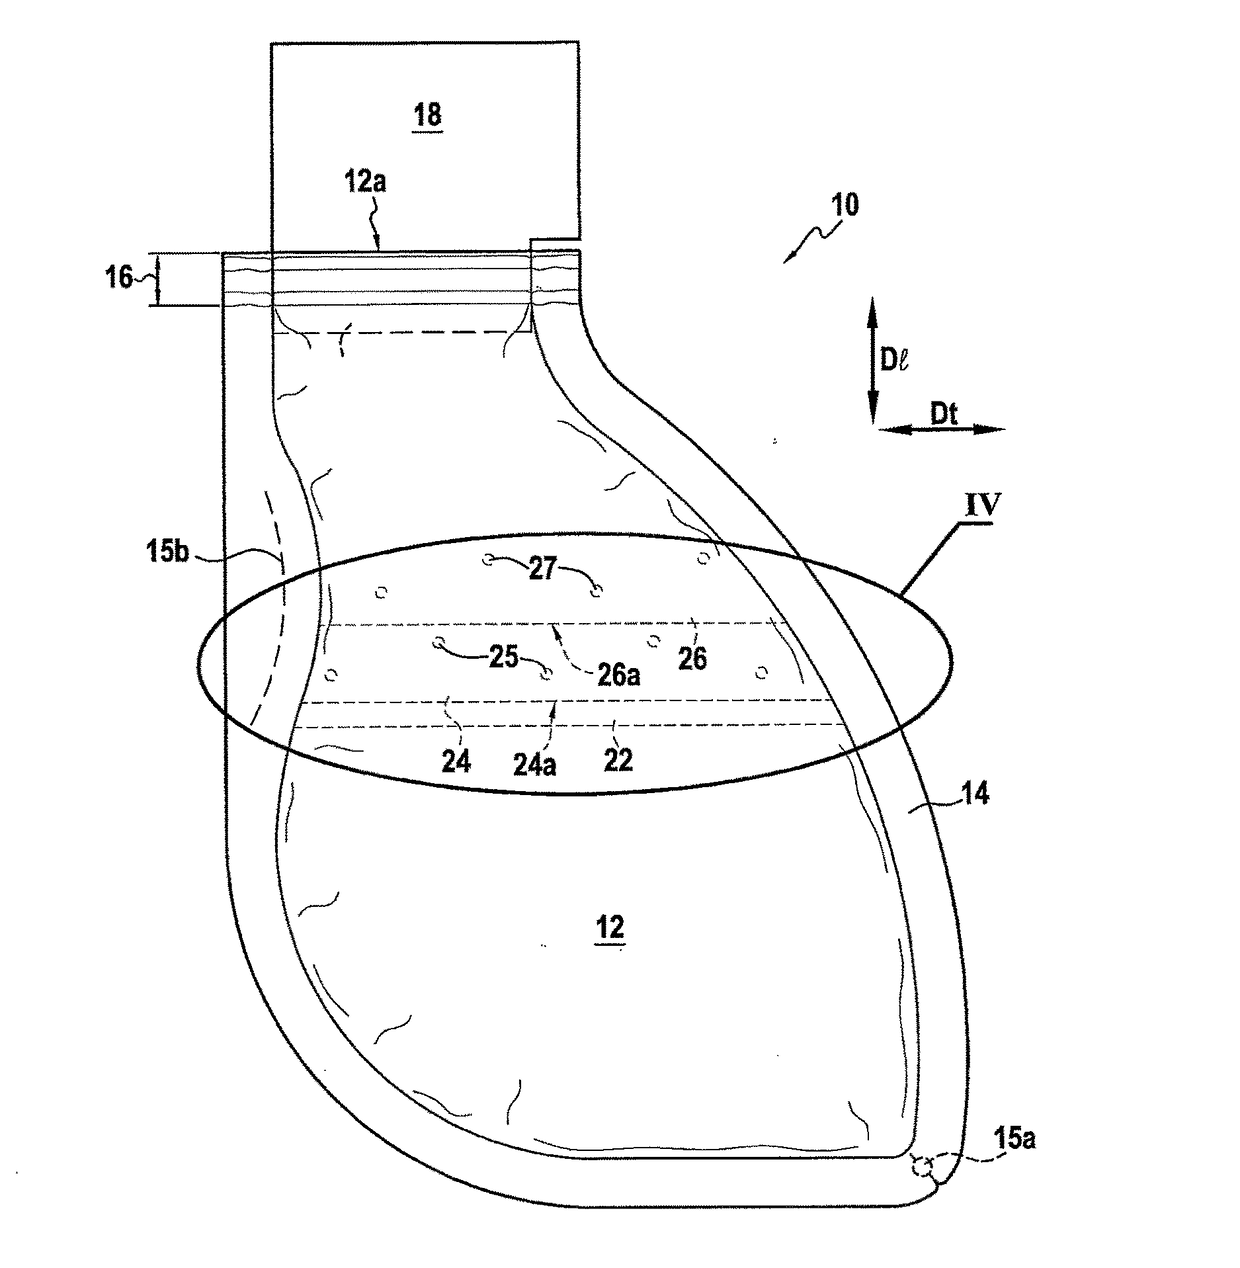 Pouch comprising a safety valve